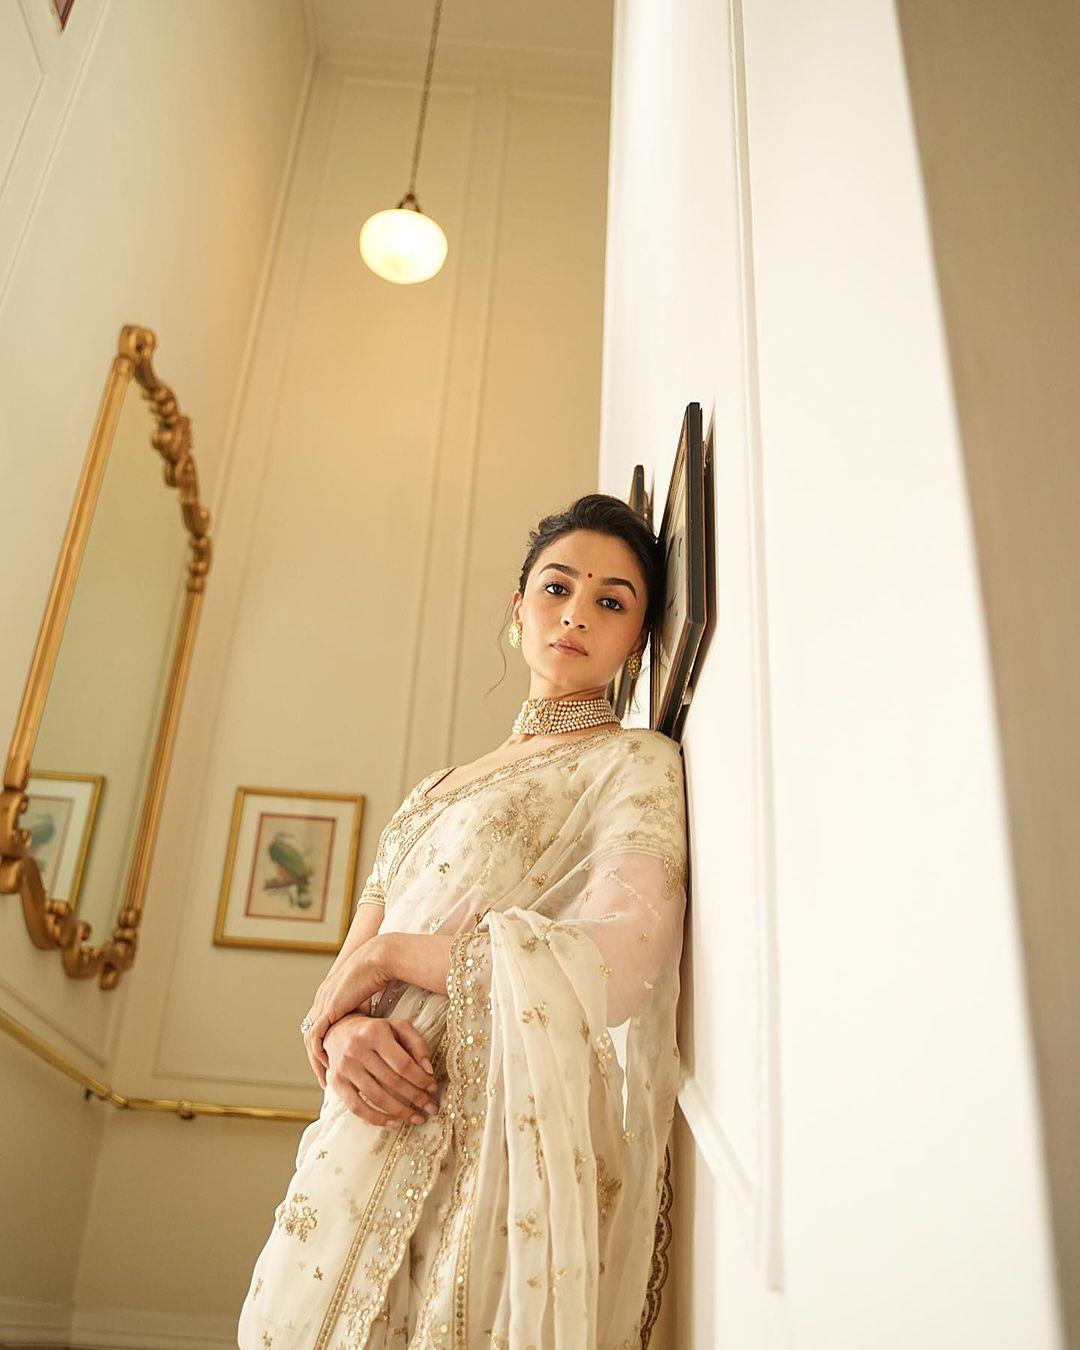 On the occasion of the 69th National Awards, Alia Bhatt repurposed her wedding saree. She looked like a vision in white!